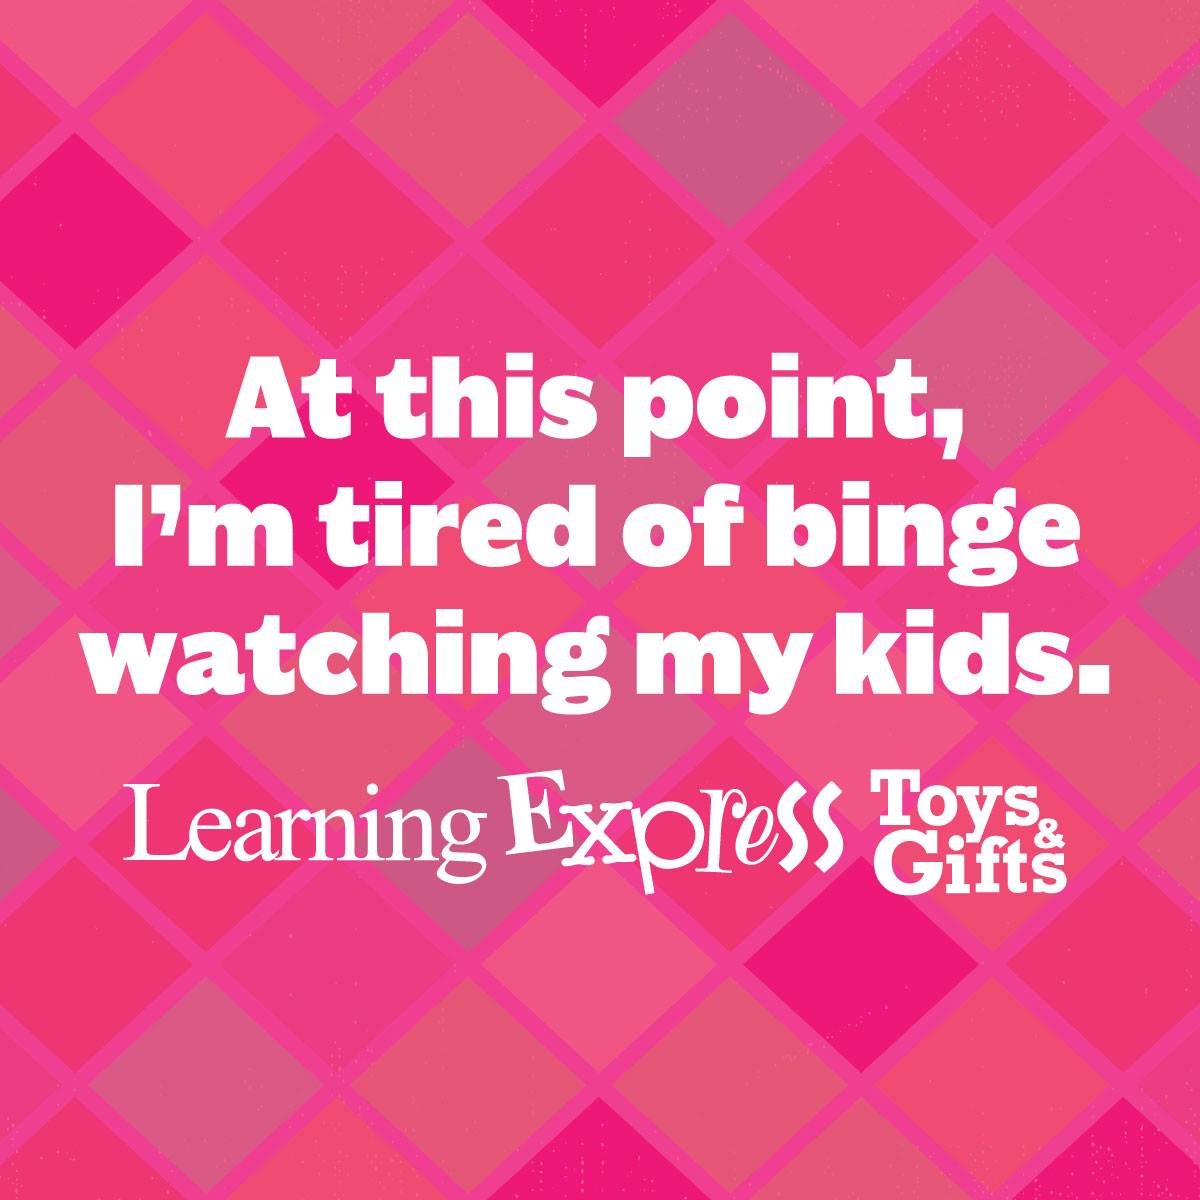 Learning Express Toys & Gifts